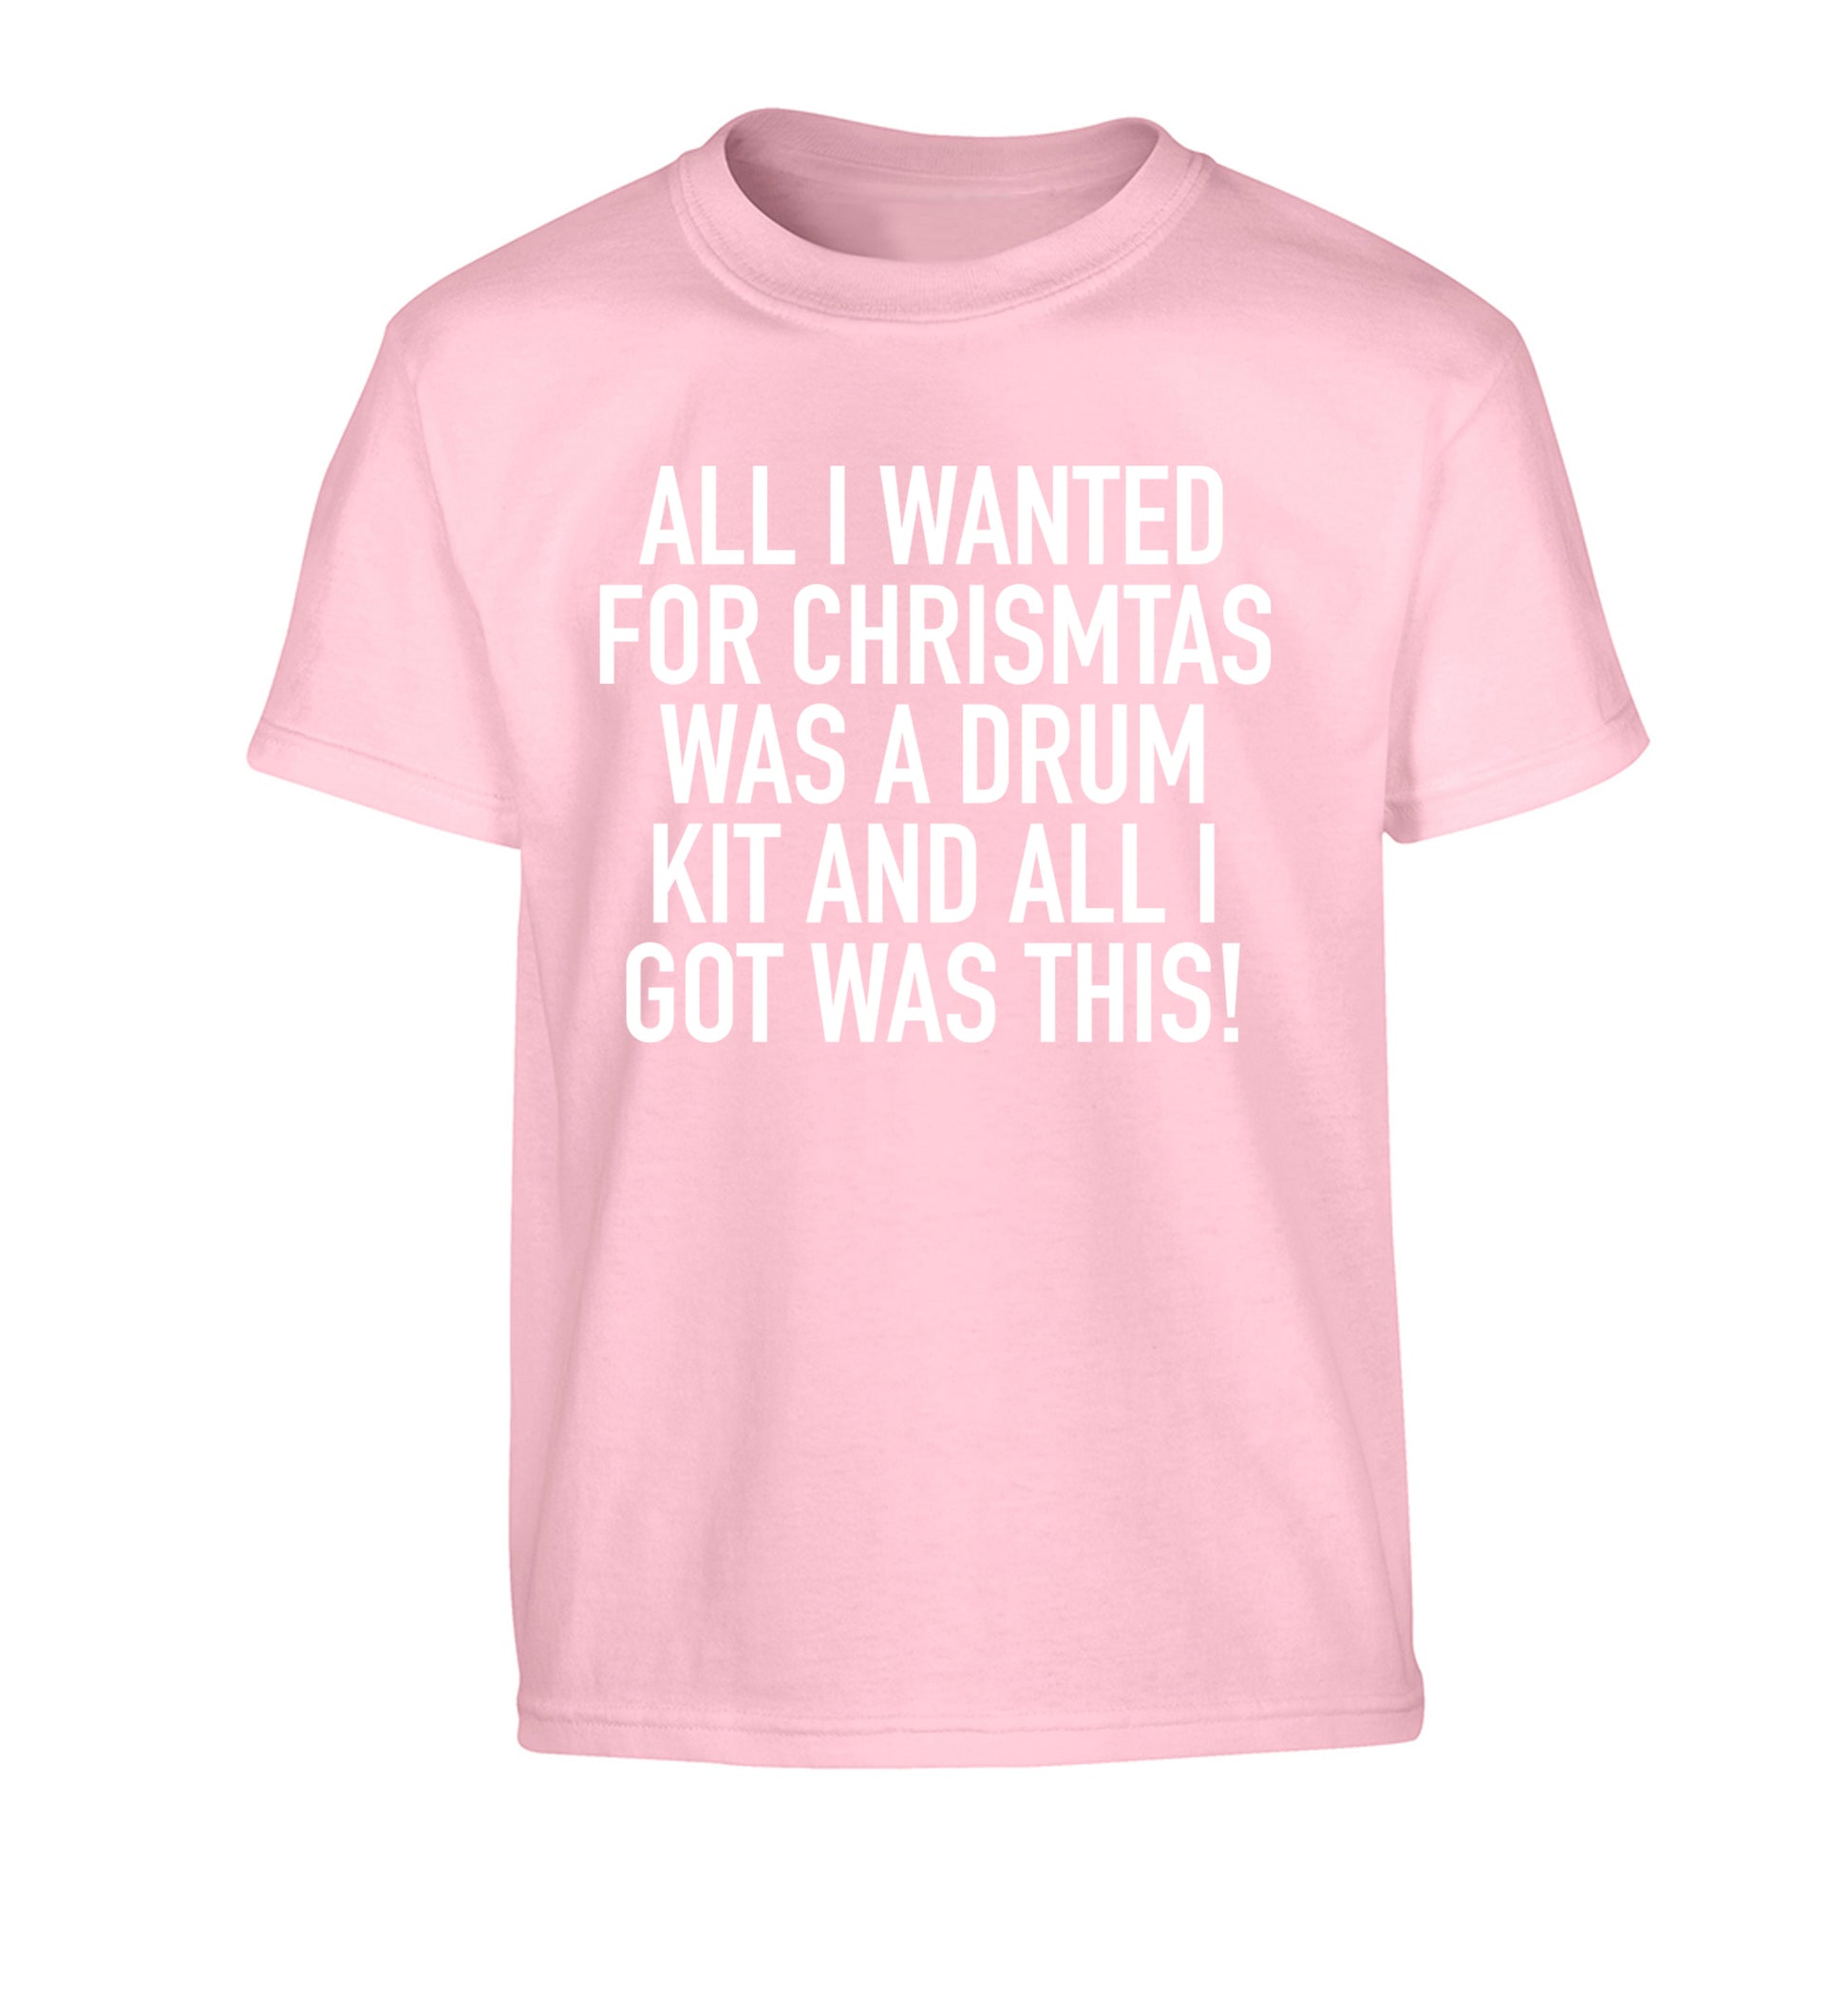 All I wanted for Christmas was a drum kit and all I got was this! Children's light pink Tshirt 12-14 Years